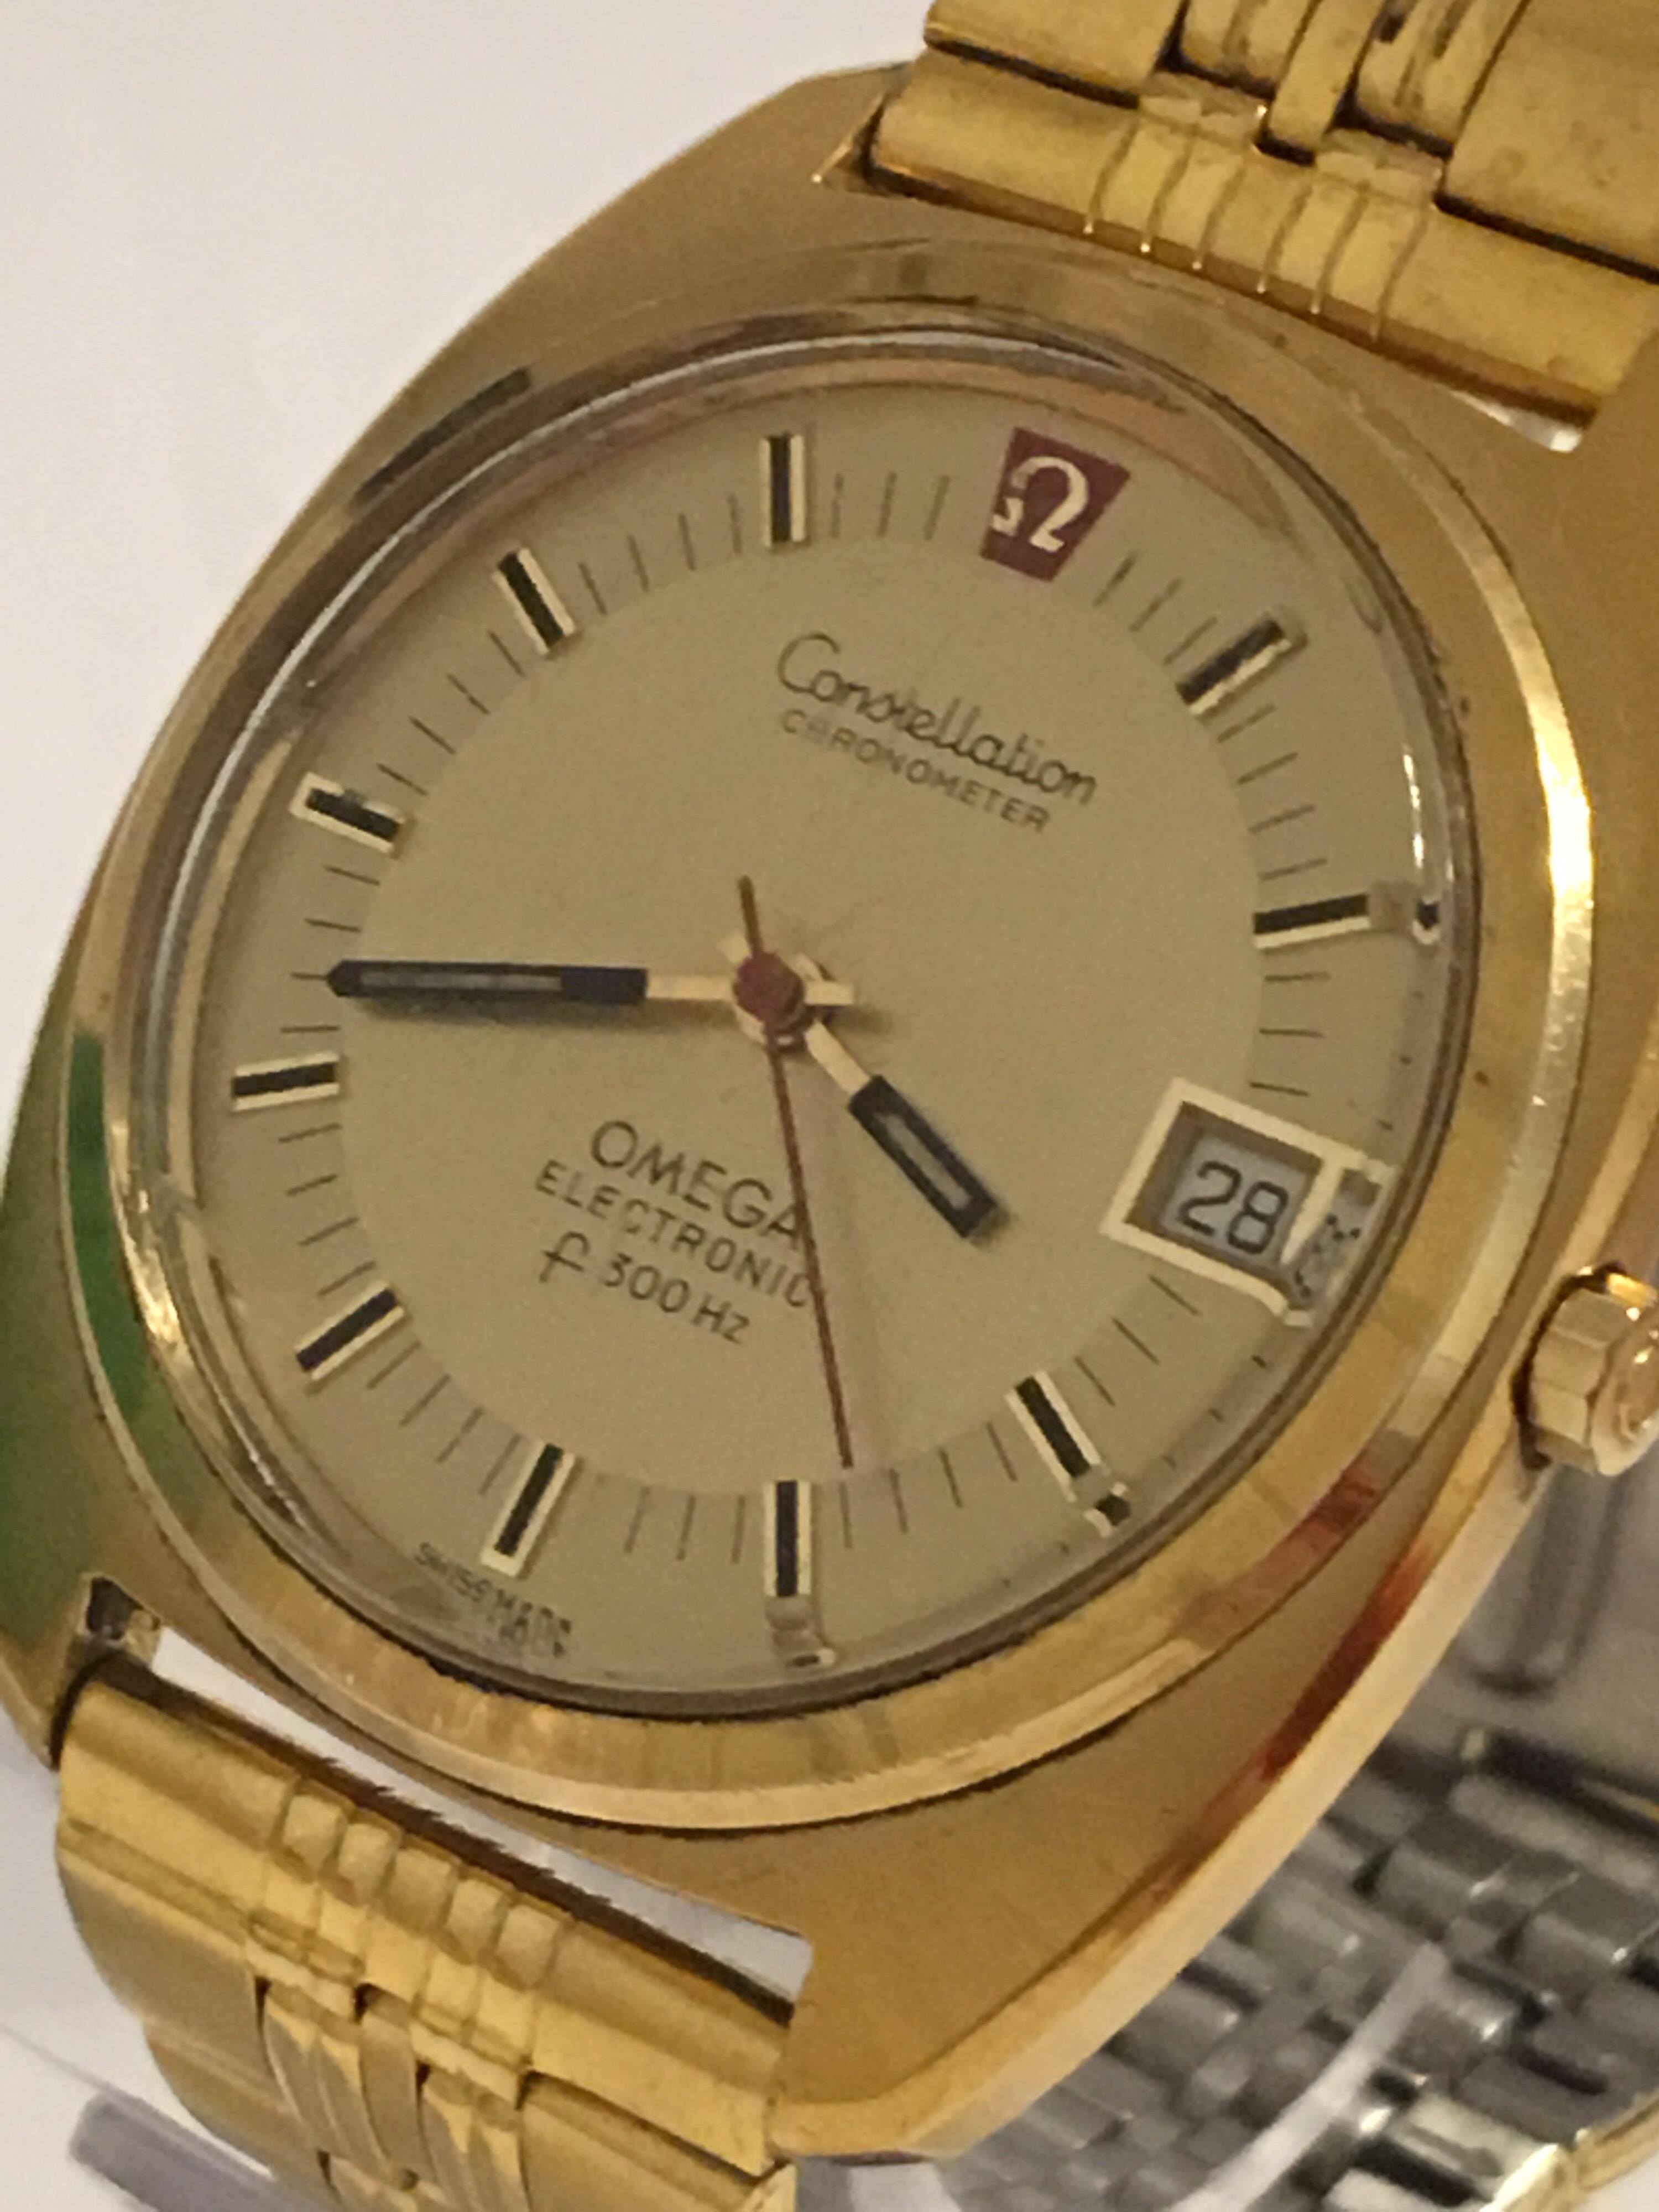 Vintage 1970s Omega Constellation F300HZ Gold-Plated Electronic Watch 6